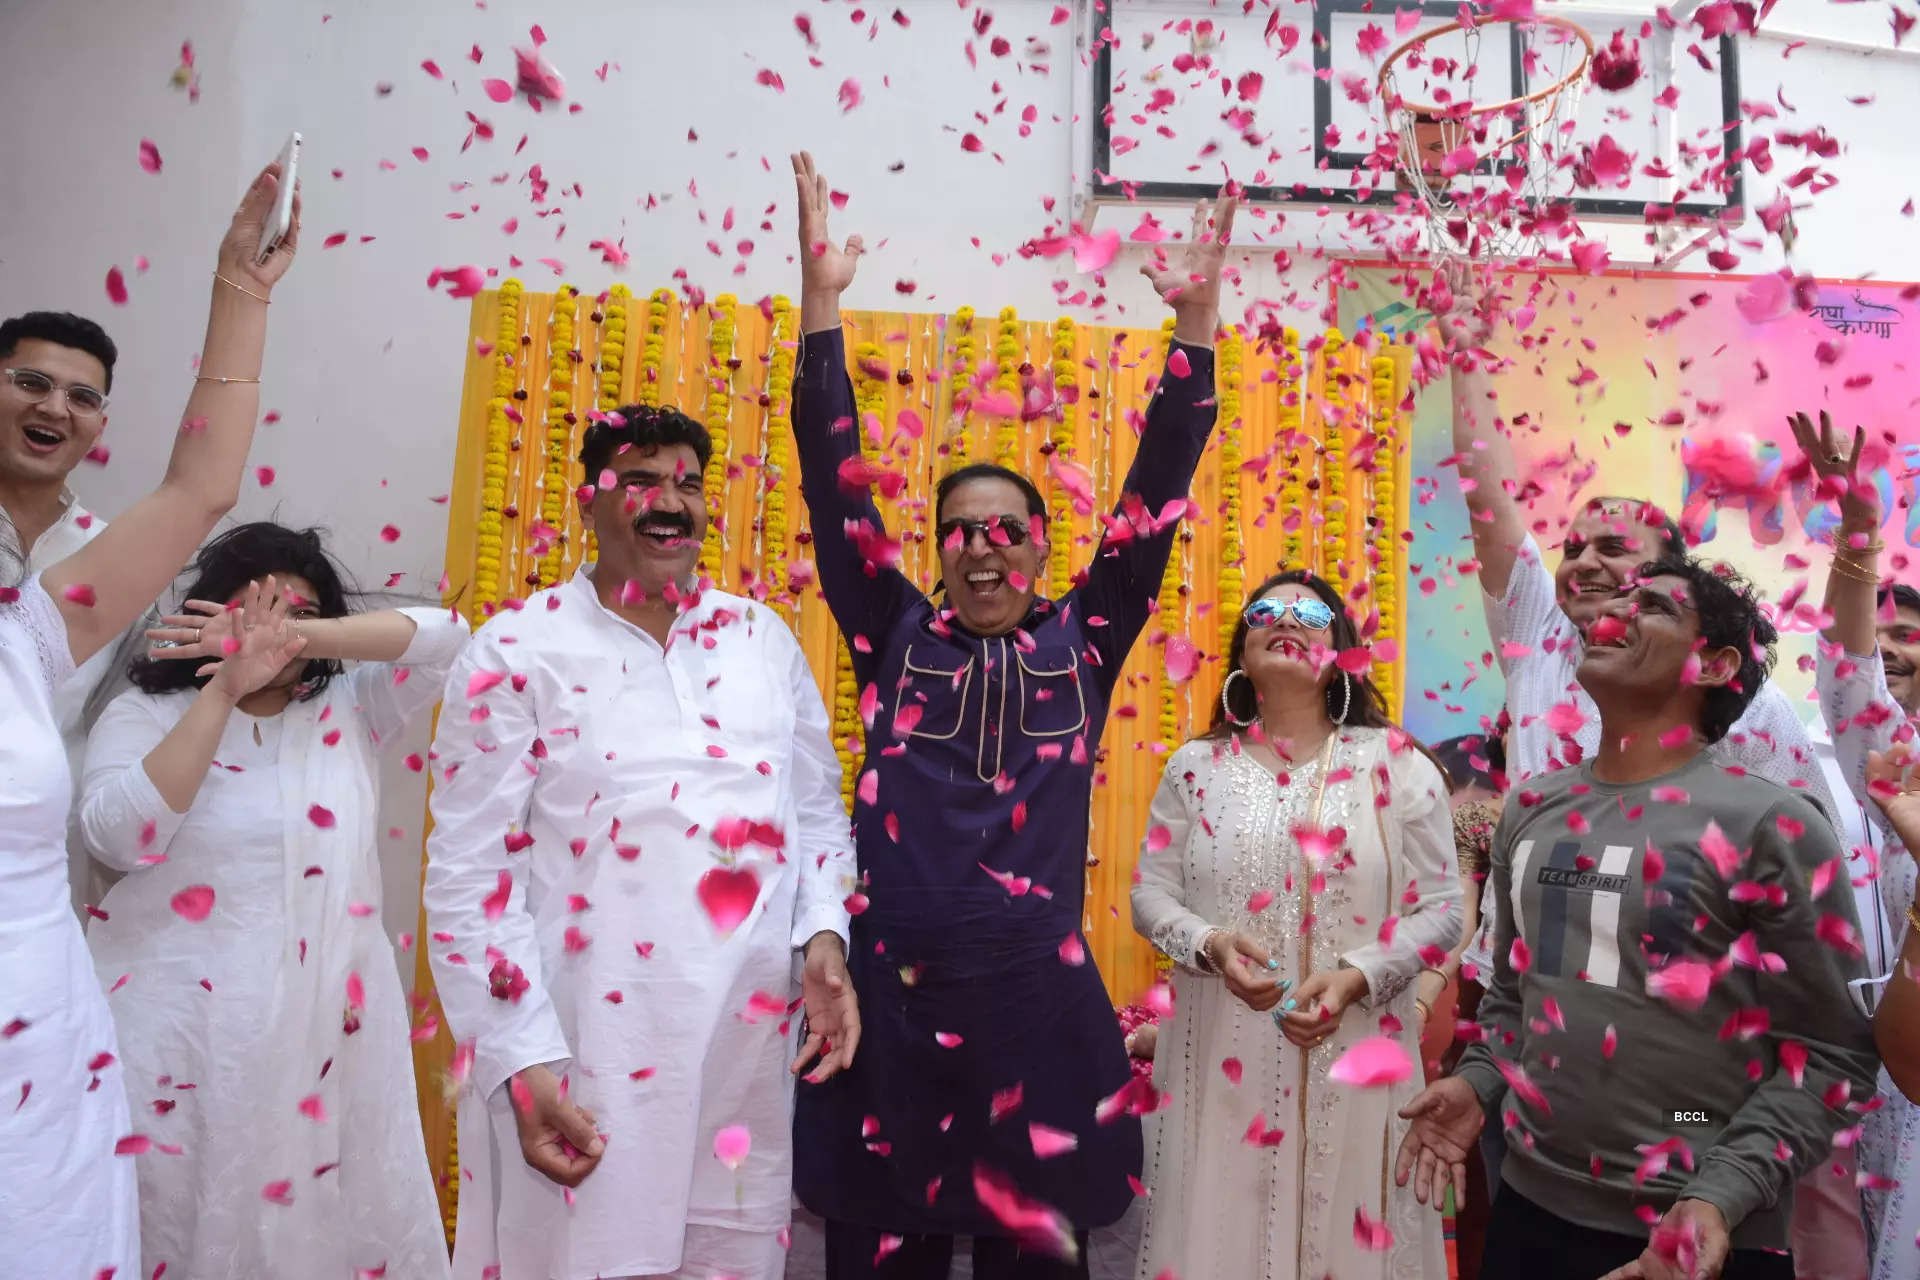 Pictures of celebs from Bollywood, Punjab, & Haryana celebrating the festival of colours